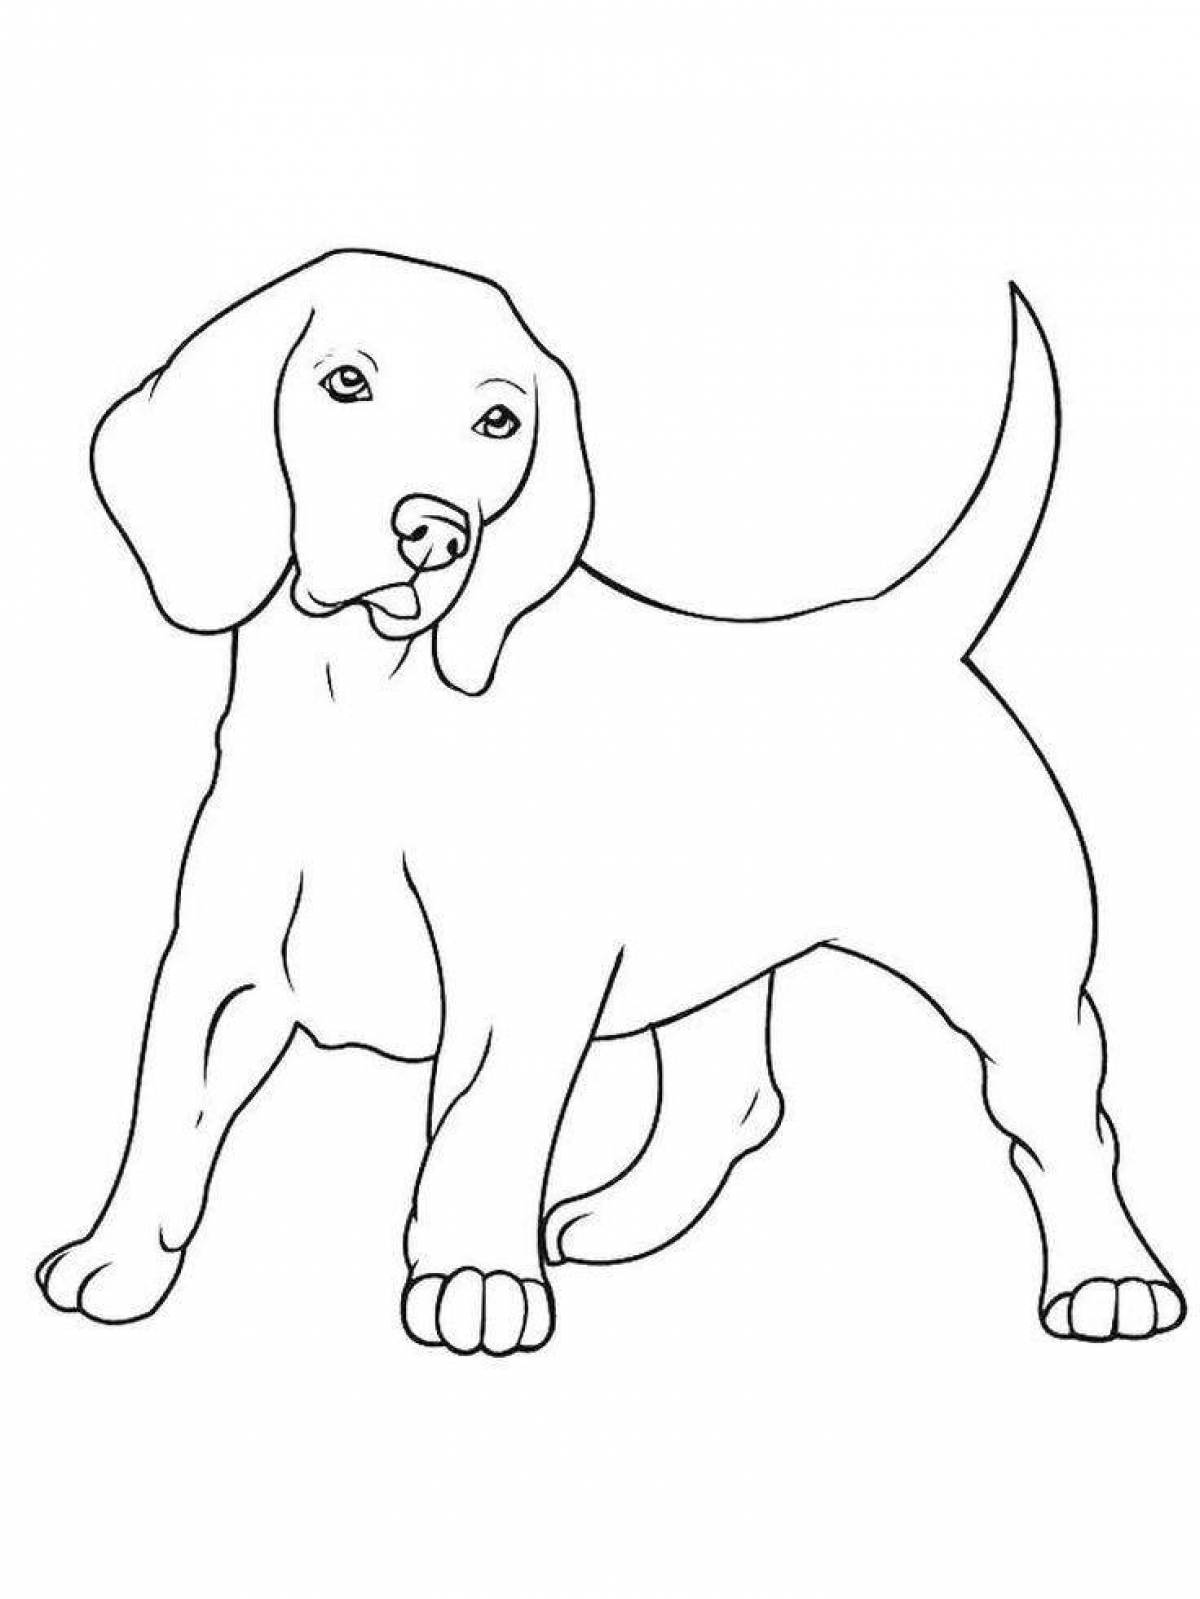 Live dog coloring